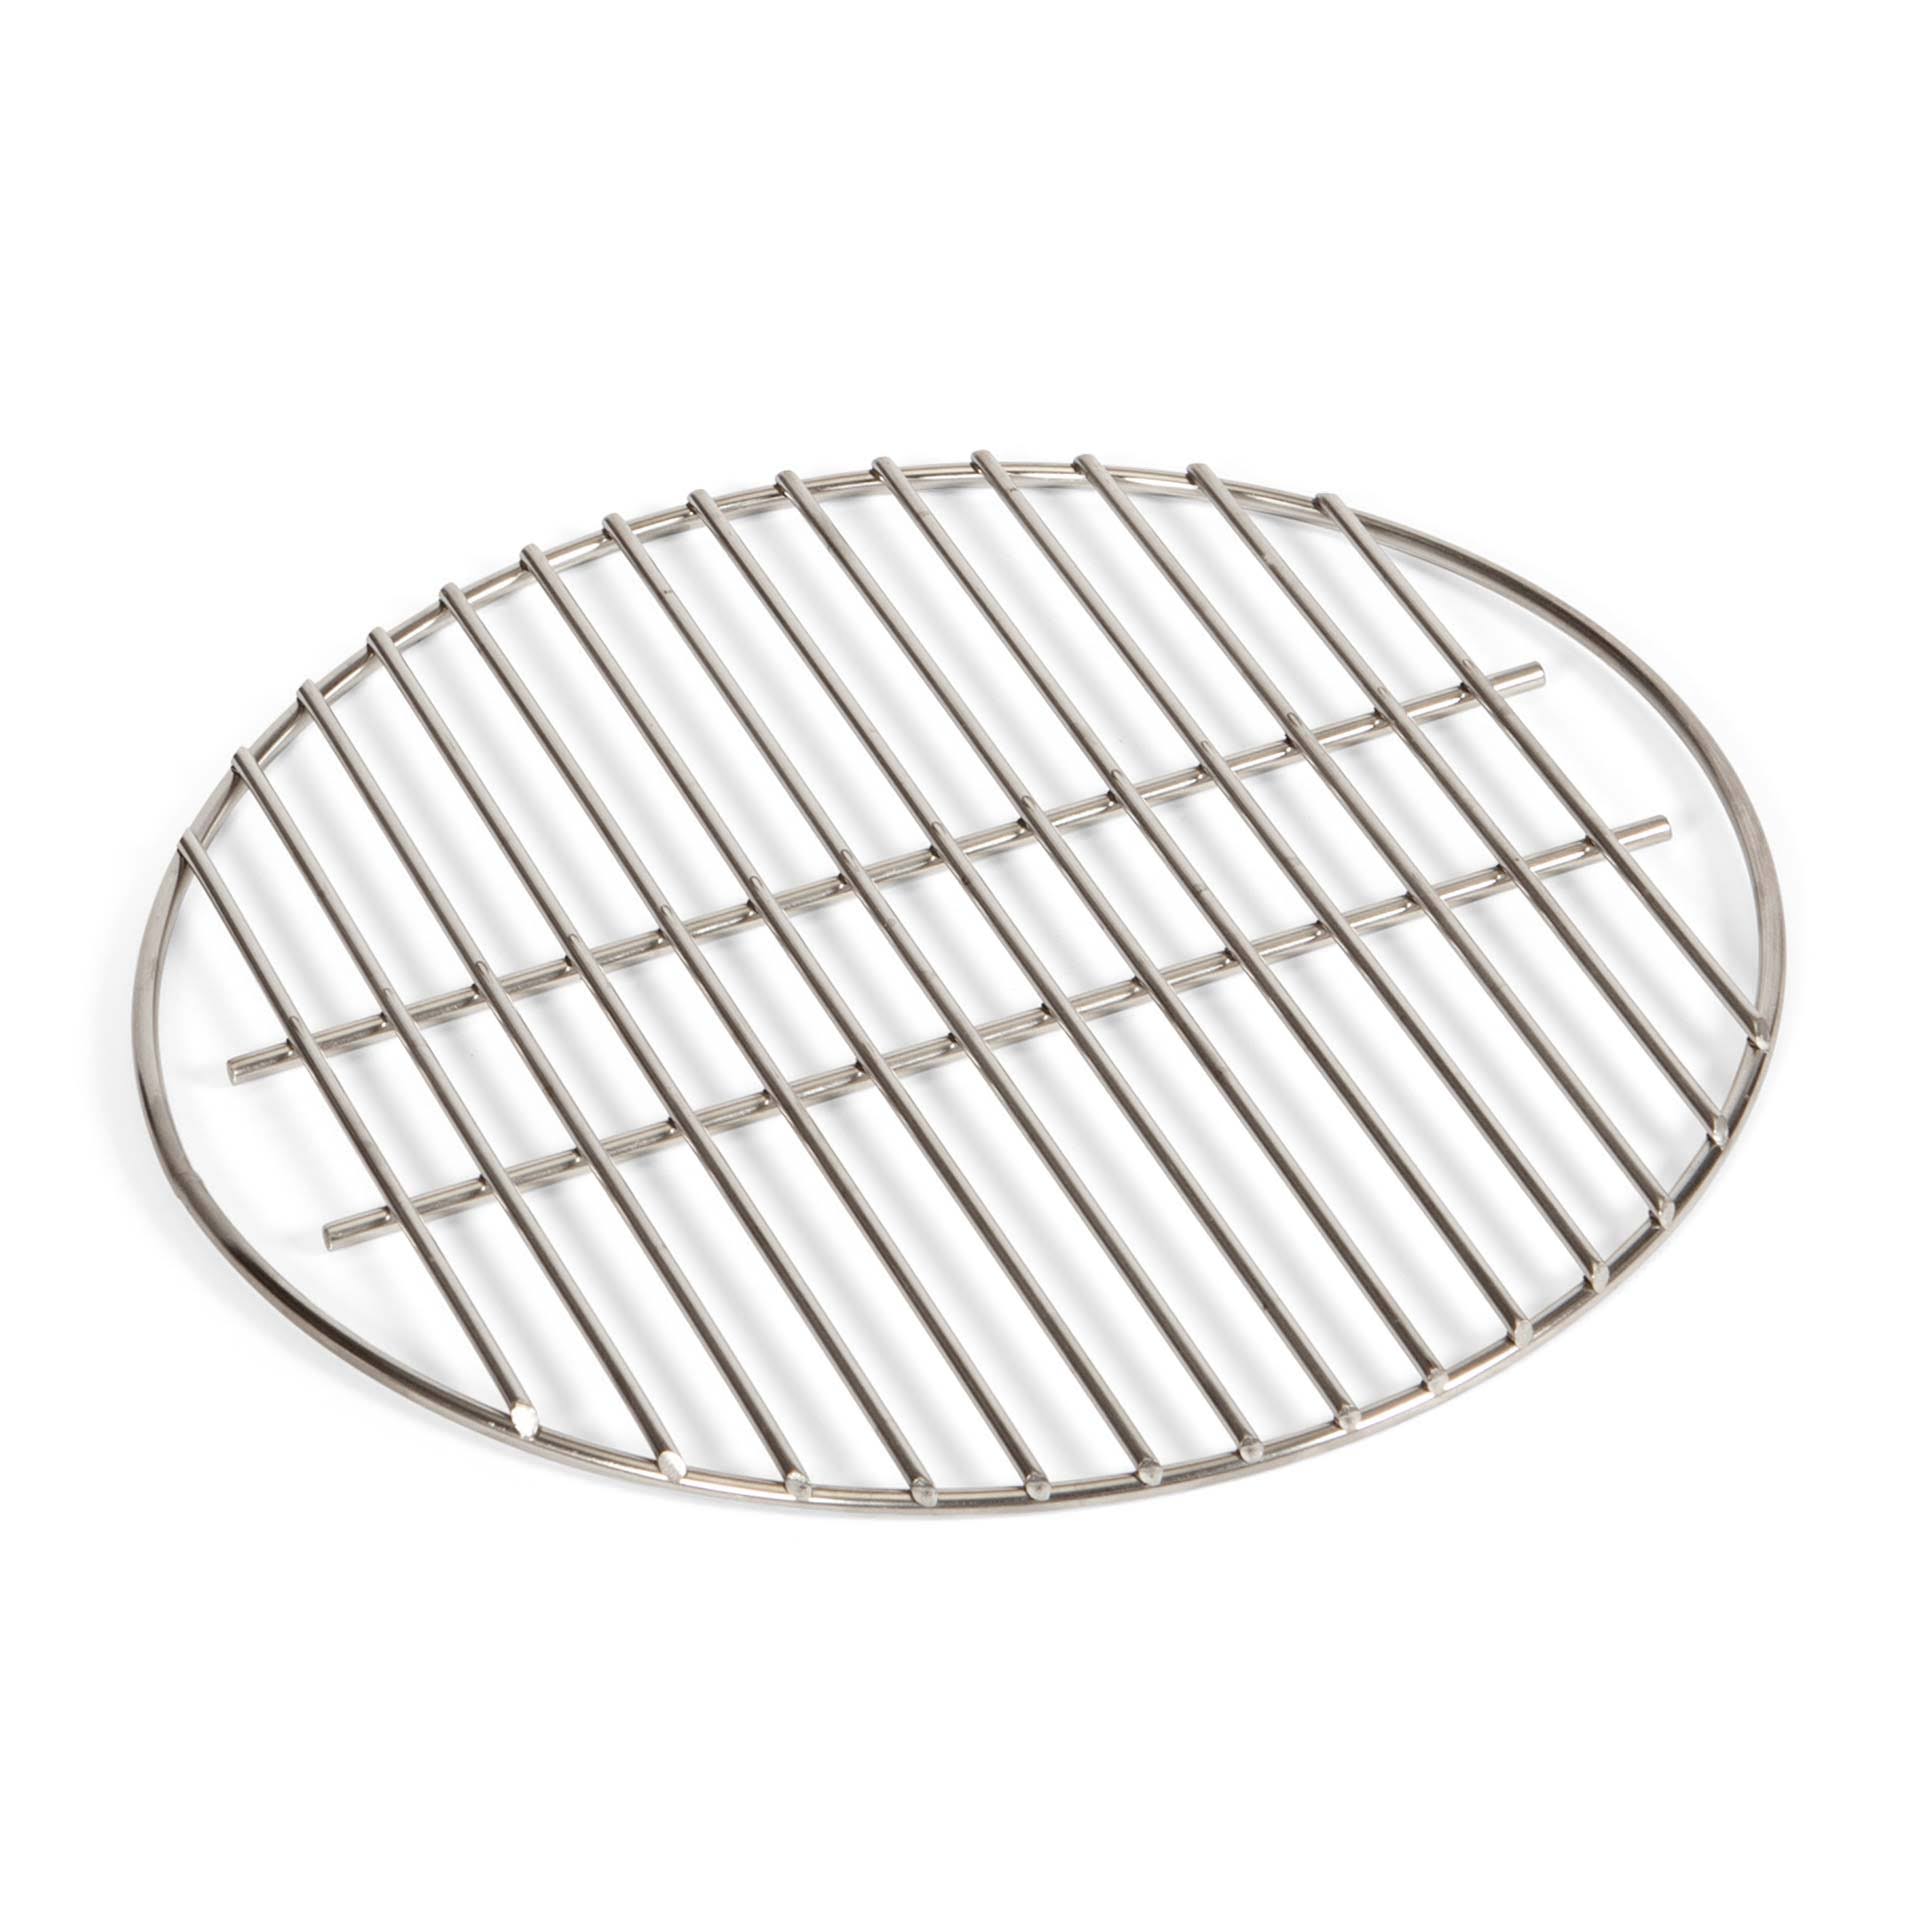 Big Green Egg Stainless Steel Cooking Grid for Large Egg - Silver, 18"